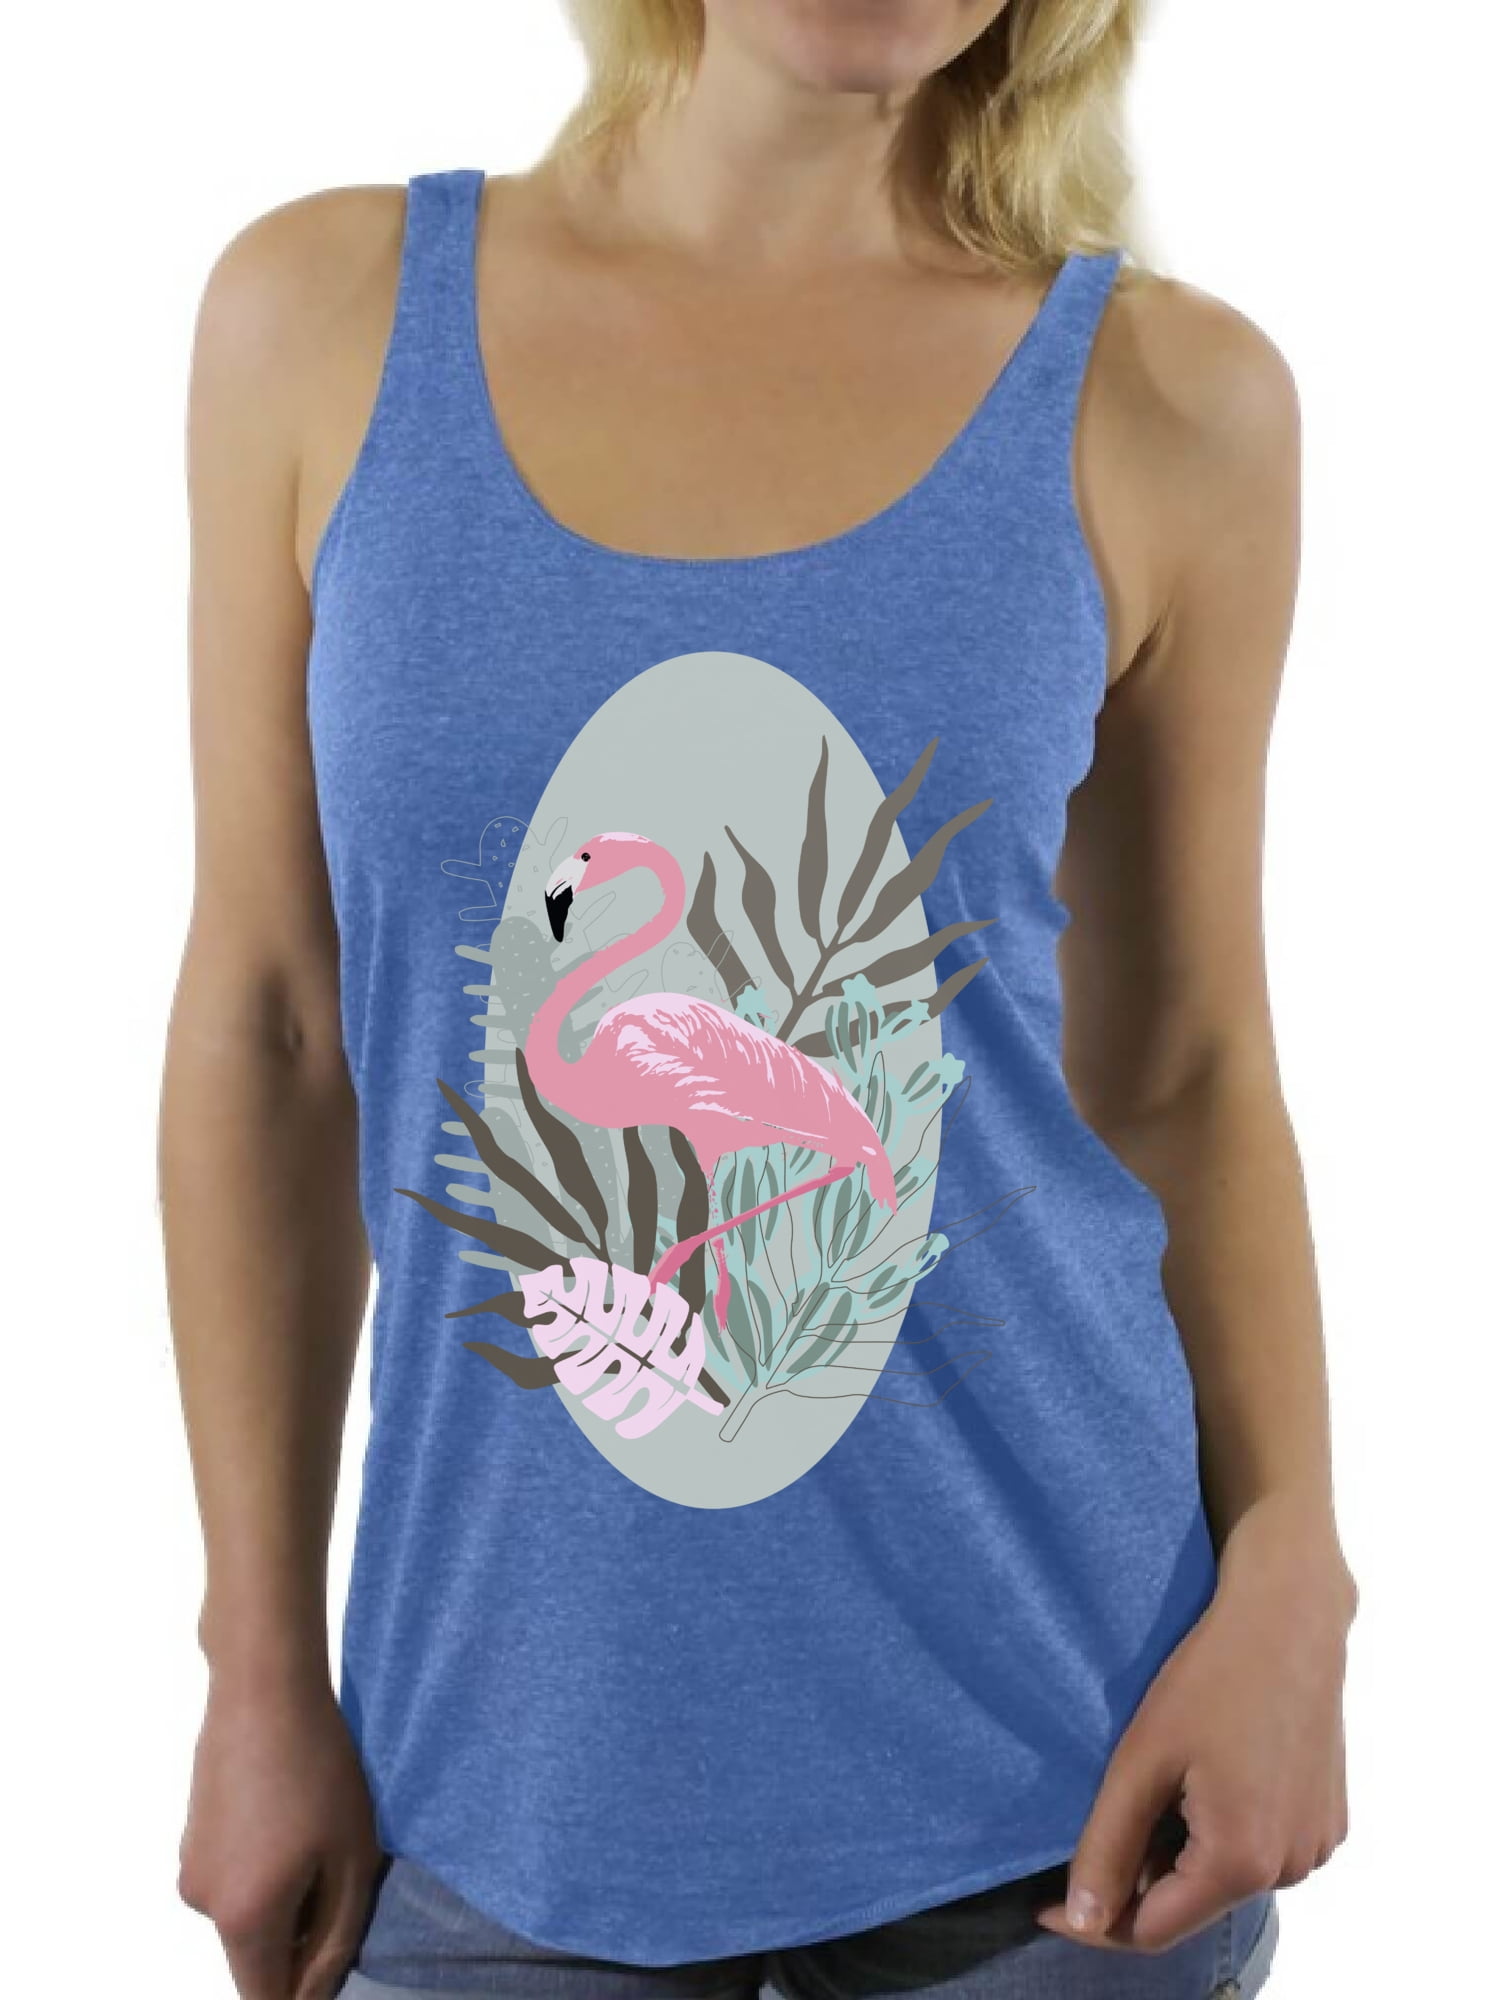 Awkward Styles Tropical Flamingo Racerback Tank Top T-Shirt for Her ...